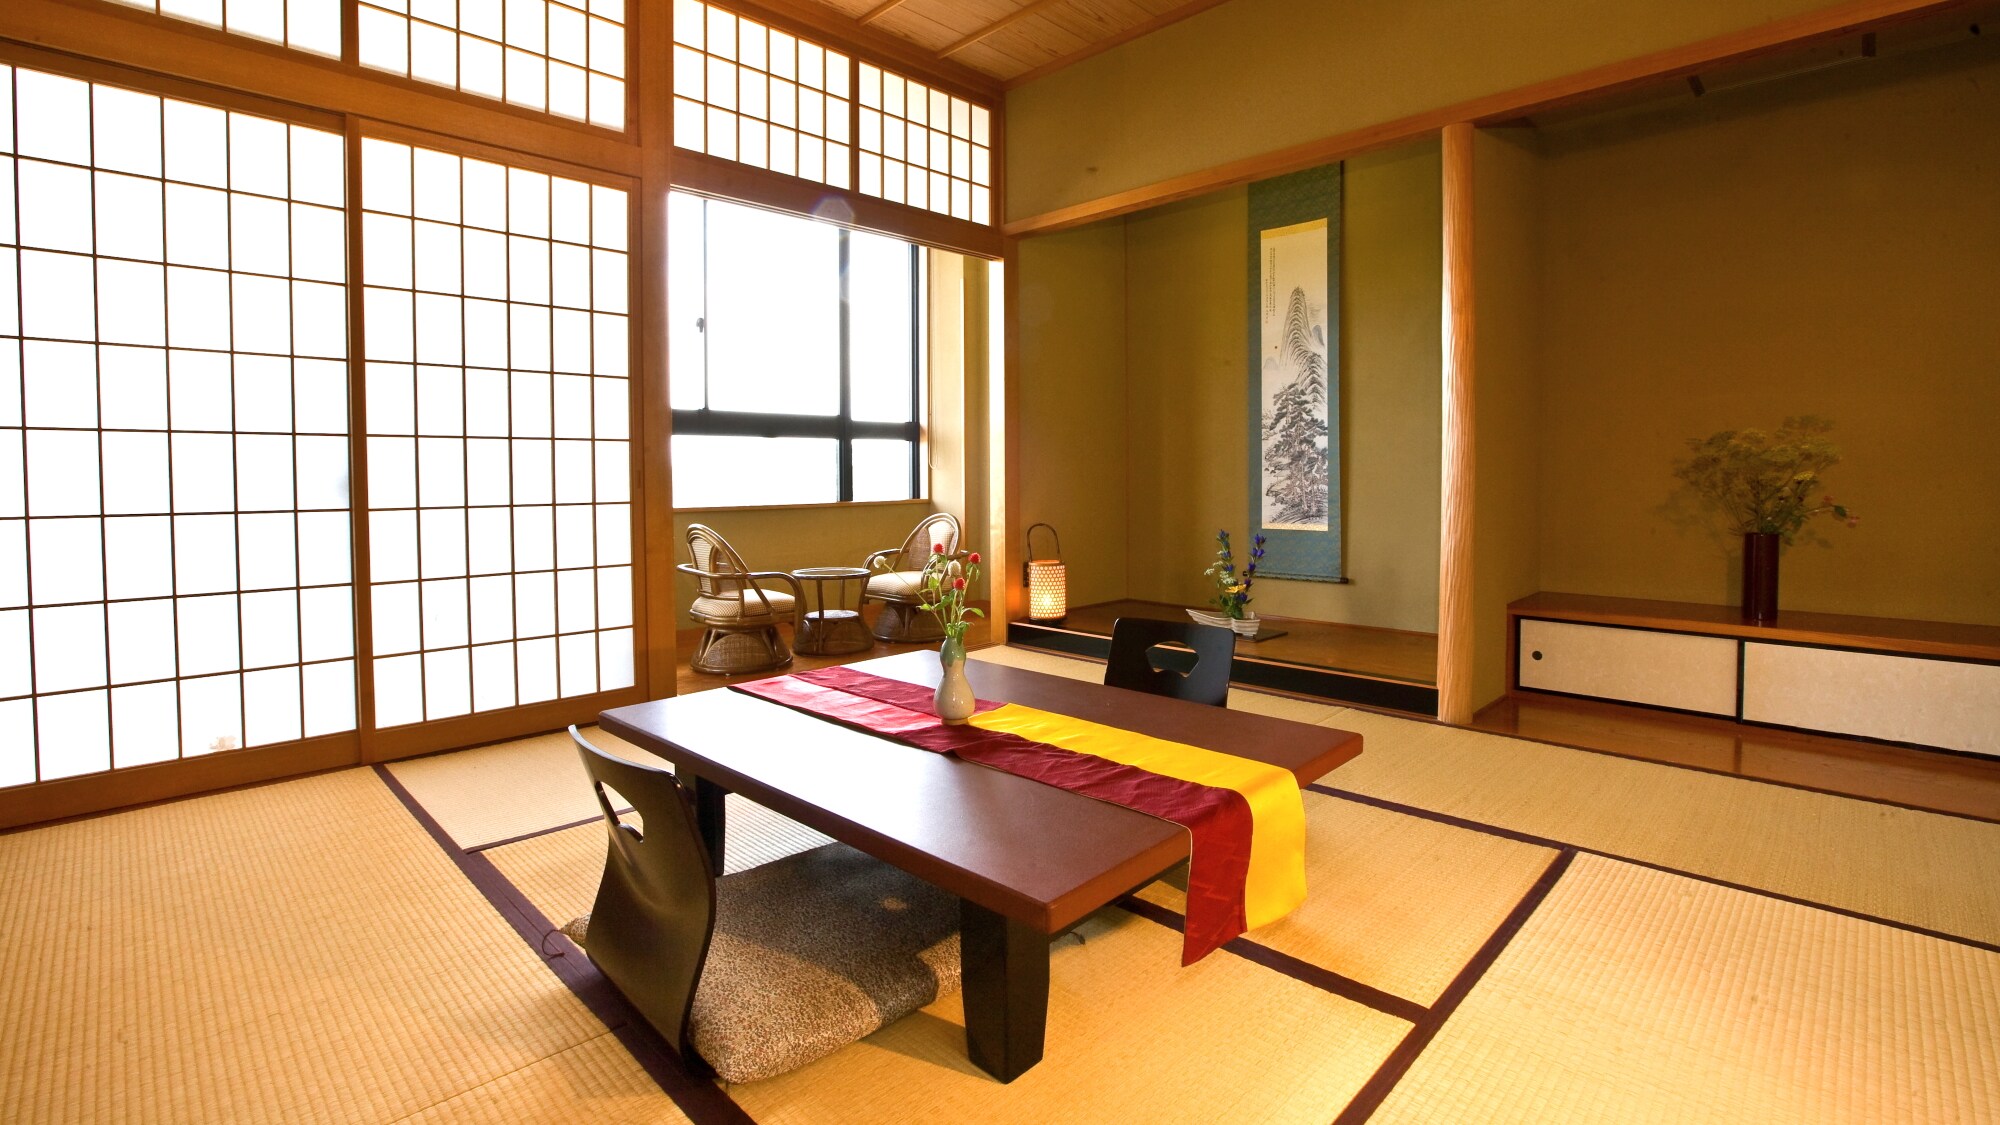 [Standard] Japanese-style room / 40-48.52 square meters-Japanese-style room with wide rim space.